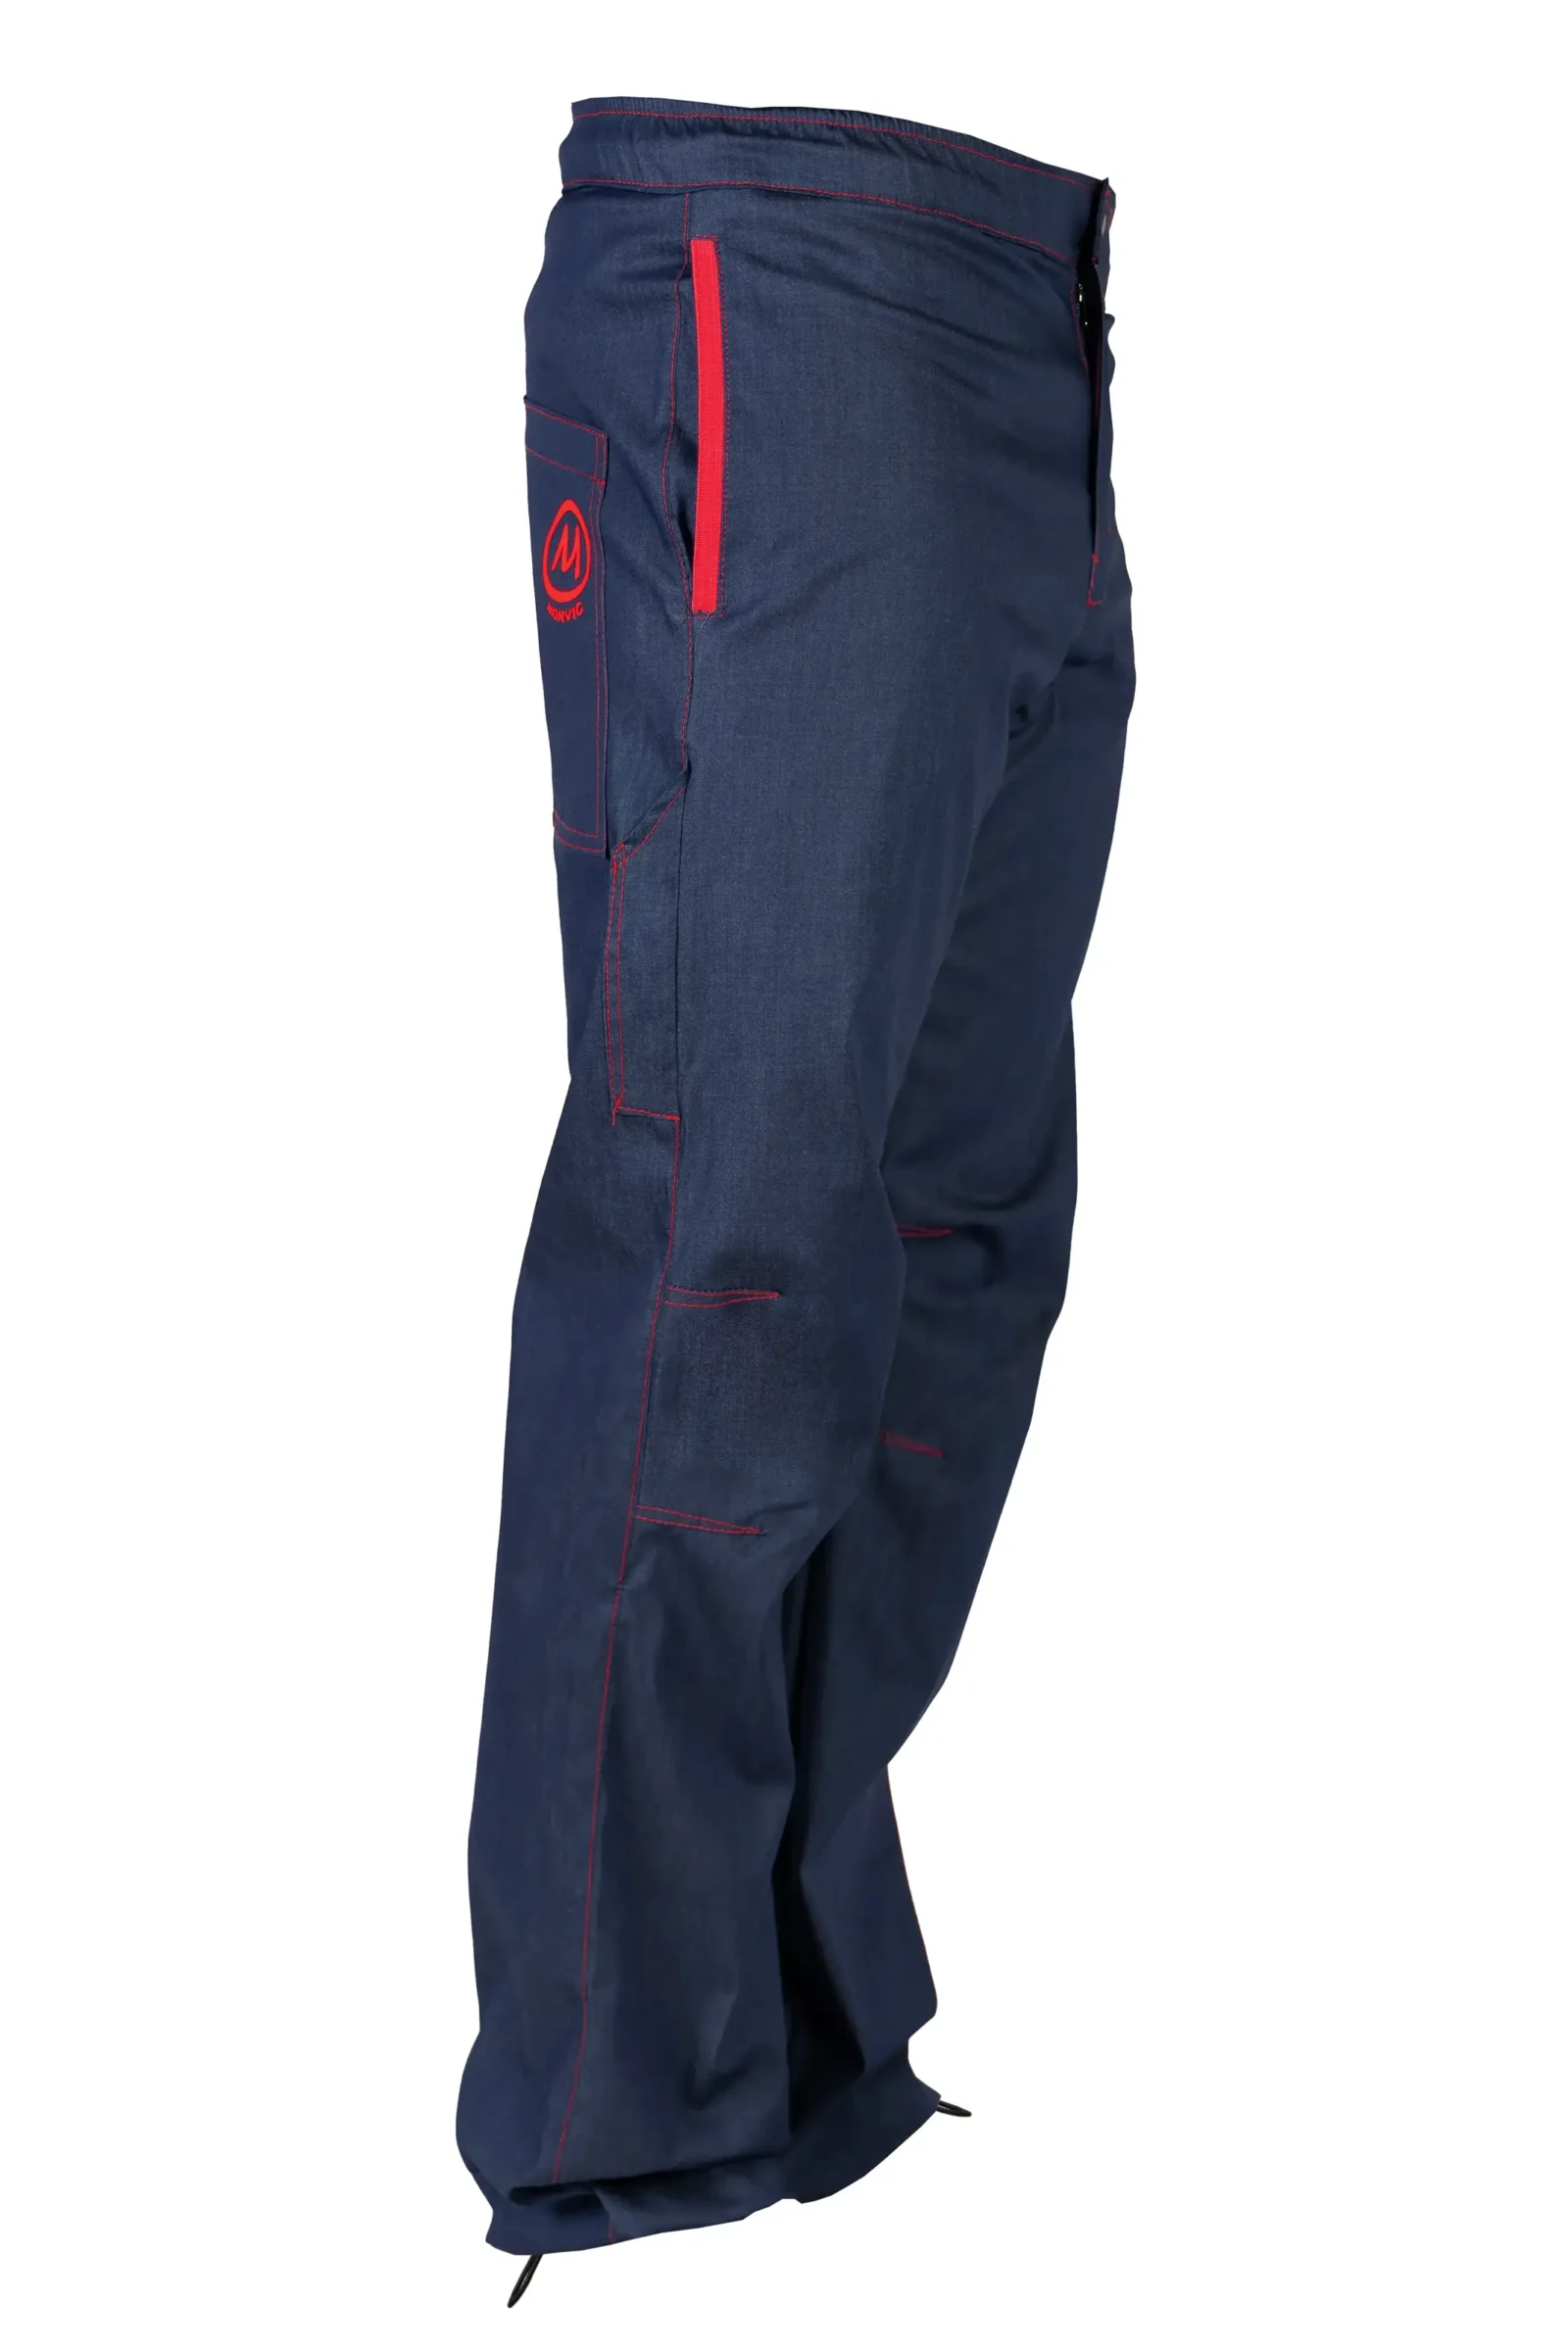 Men's climbing jeans - denim - red profile and stitching - GERONIMO Monvic